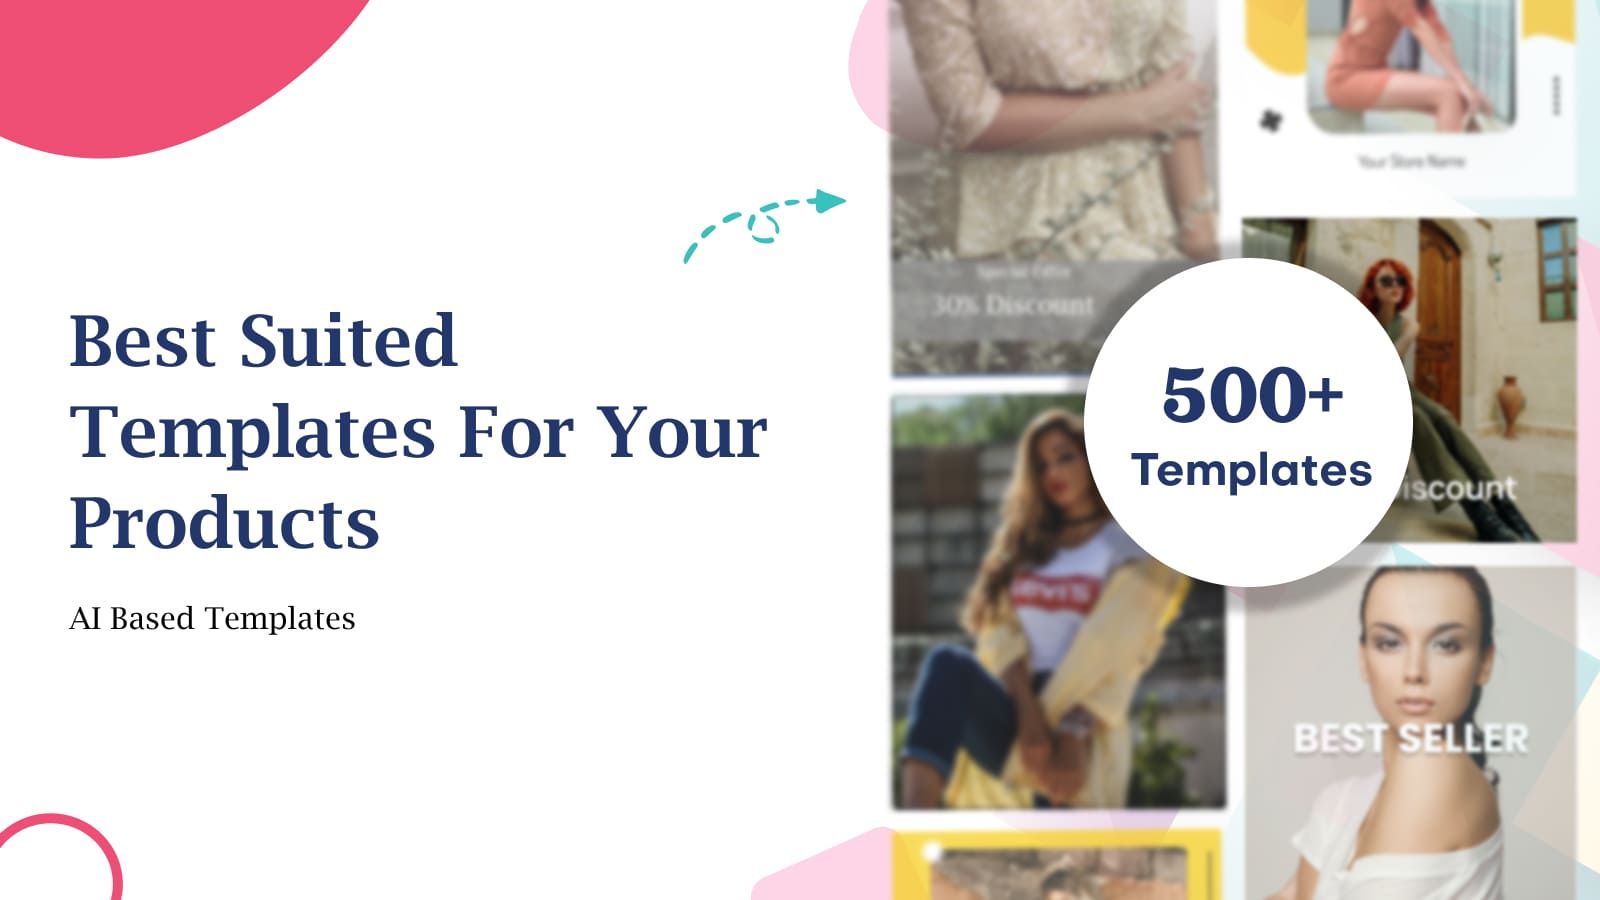 Best Suited Templates For Your Products